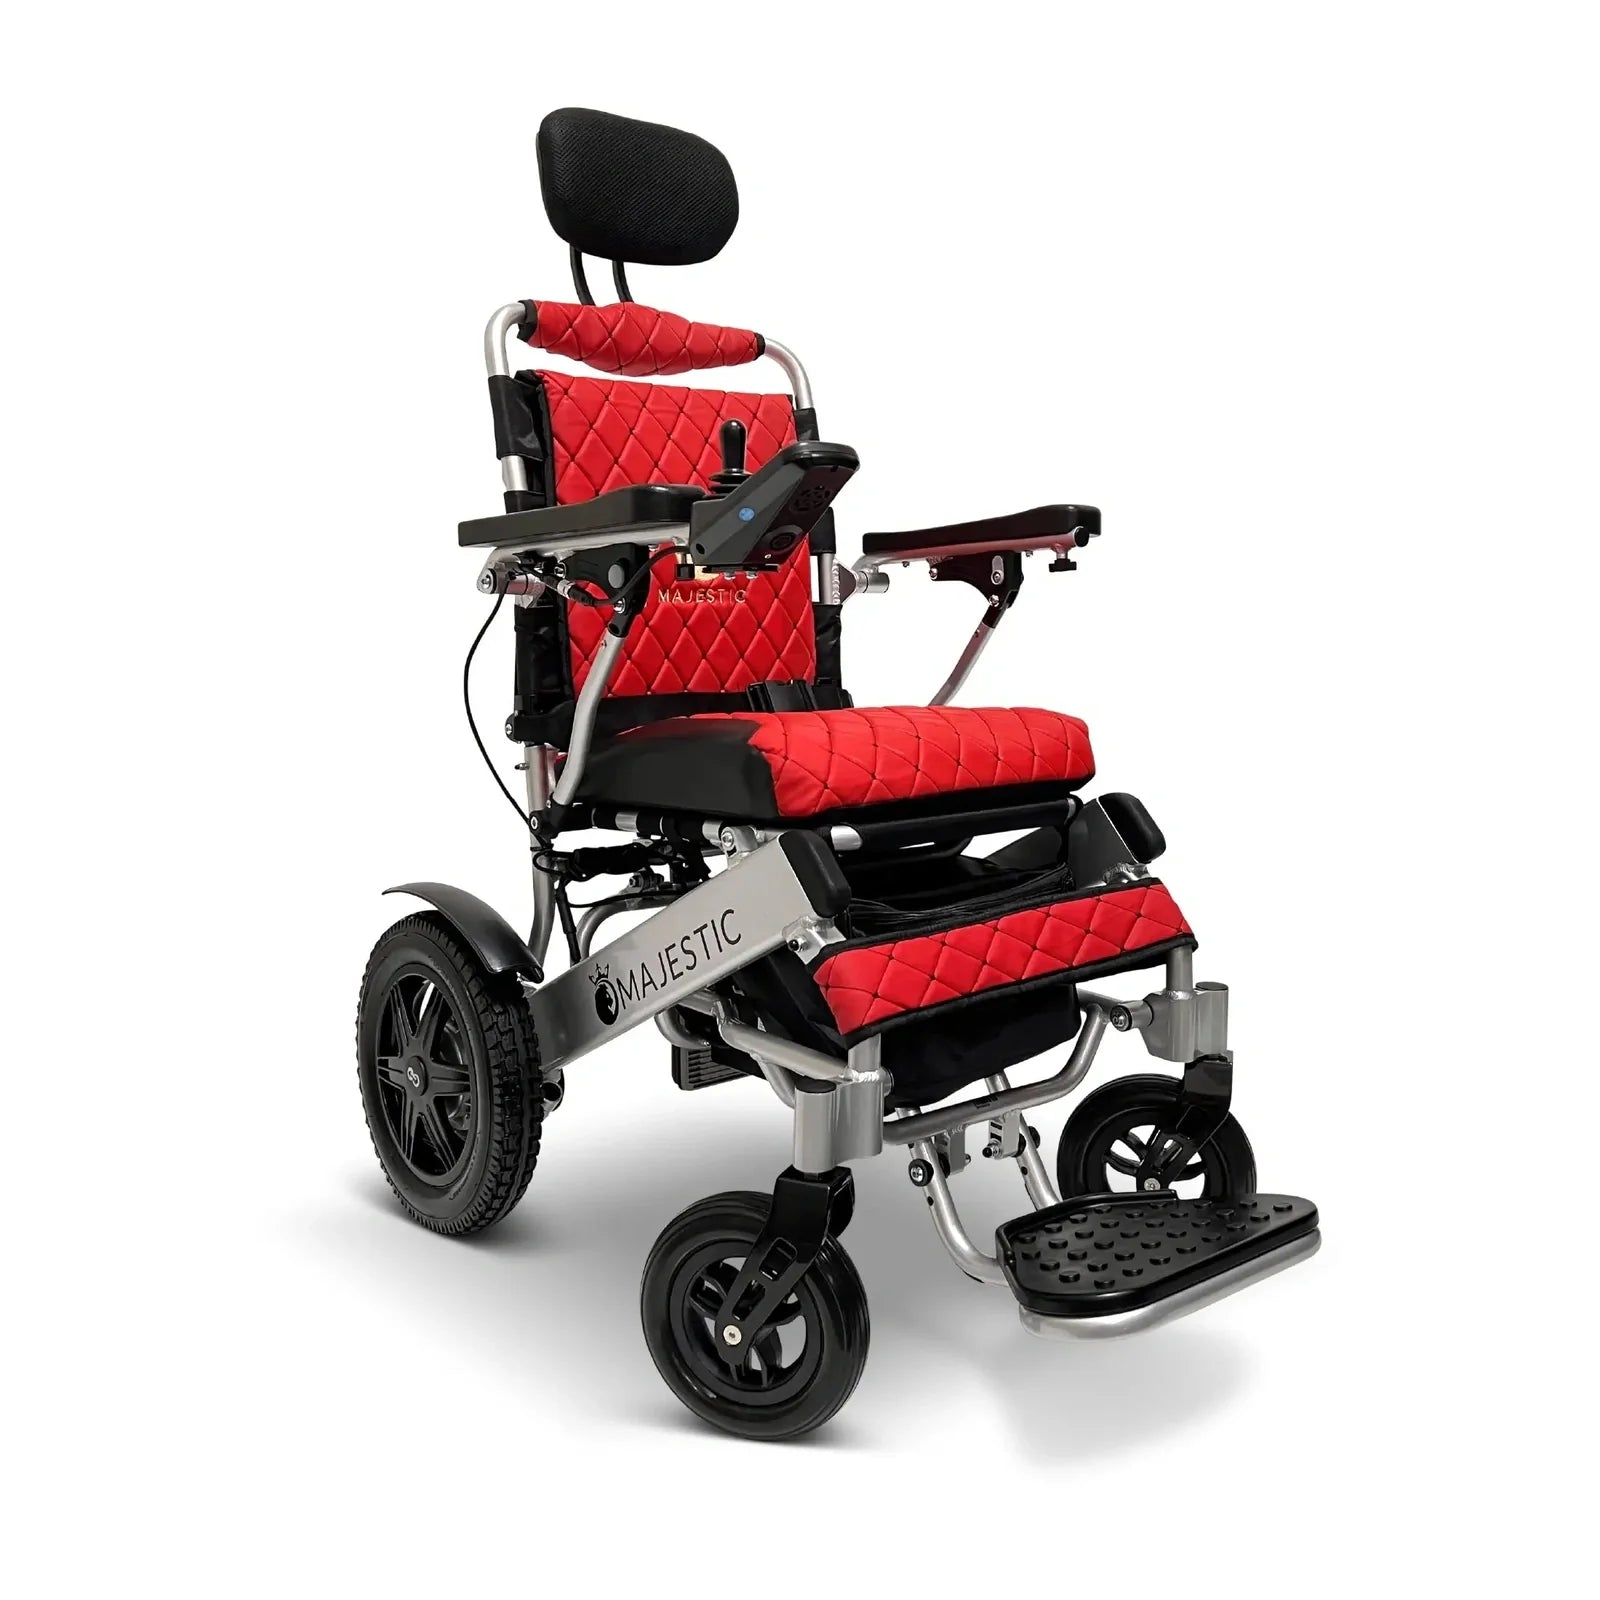 ComfyGO Majestic IQ-9000 Long Range Remote Controlled Folding Reclining Electric Wheelchair Power Wheelchairs ComfyGO Silver Red Auto Reclining